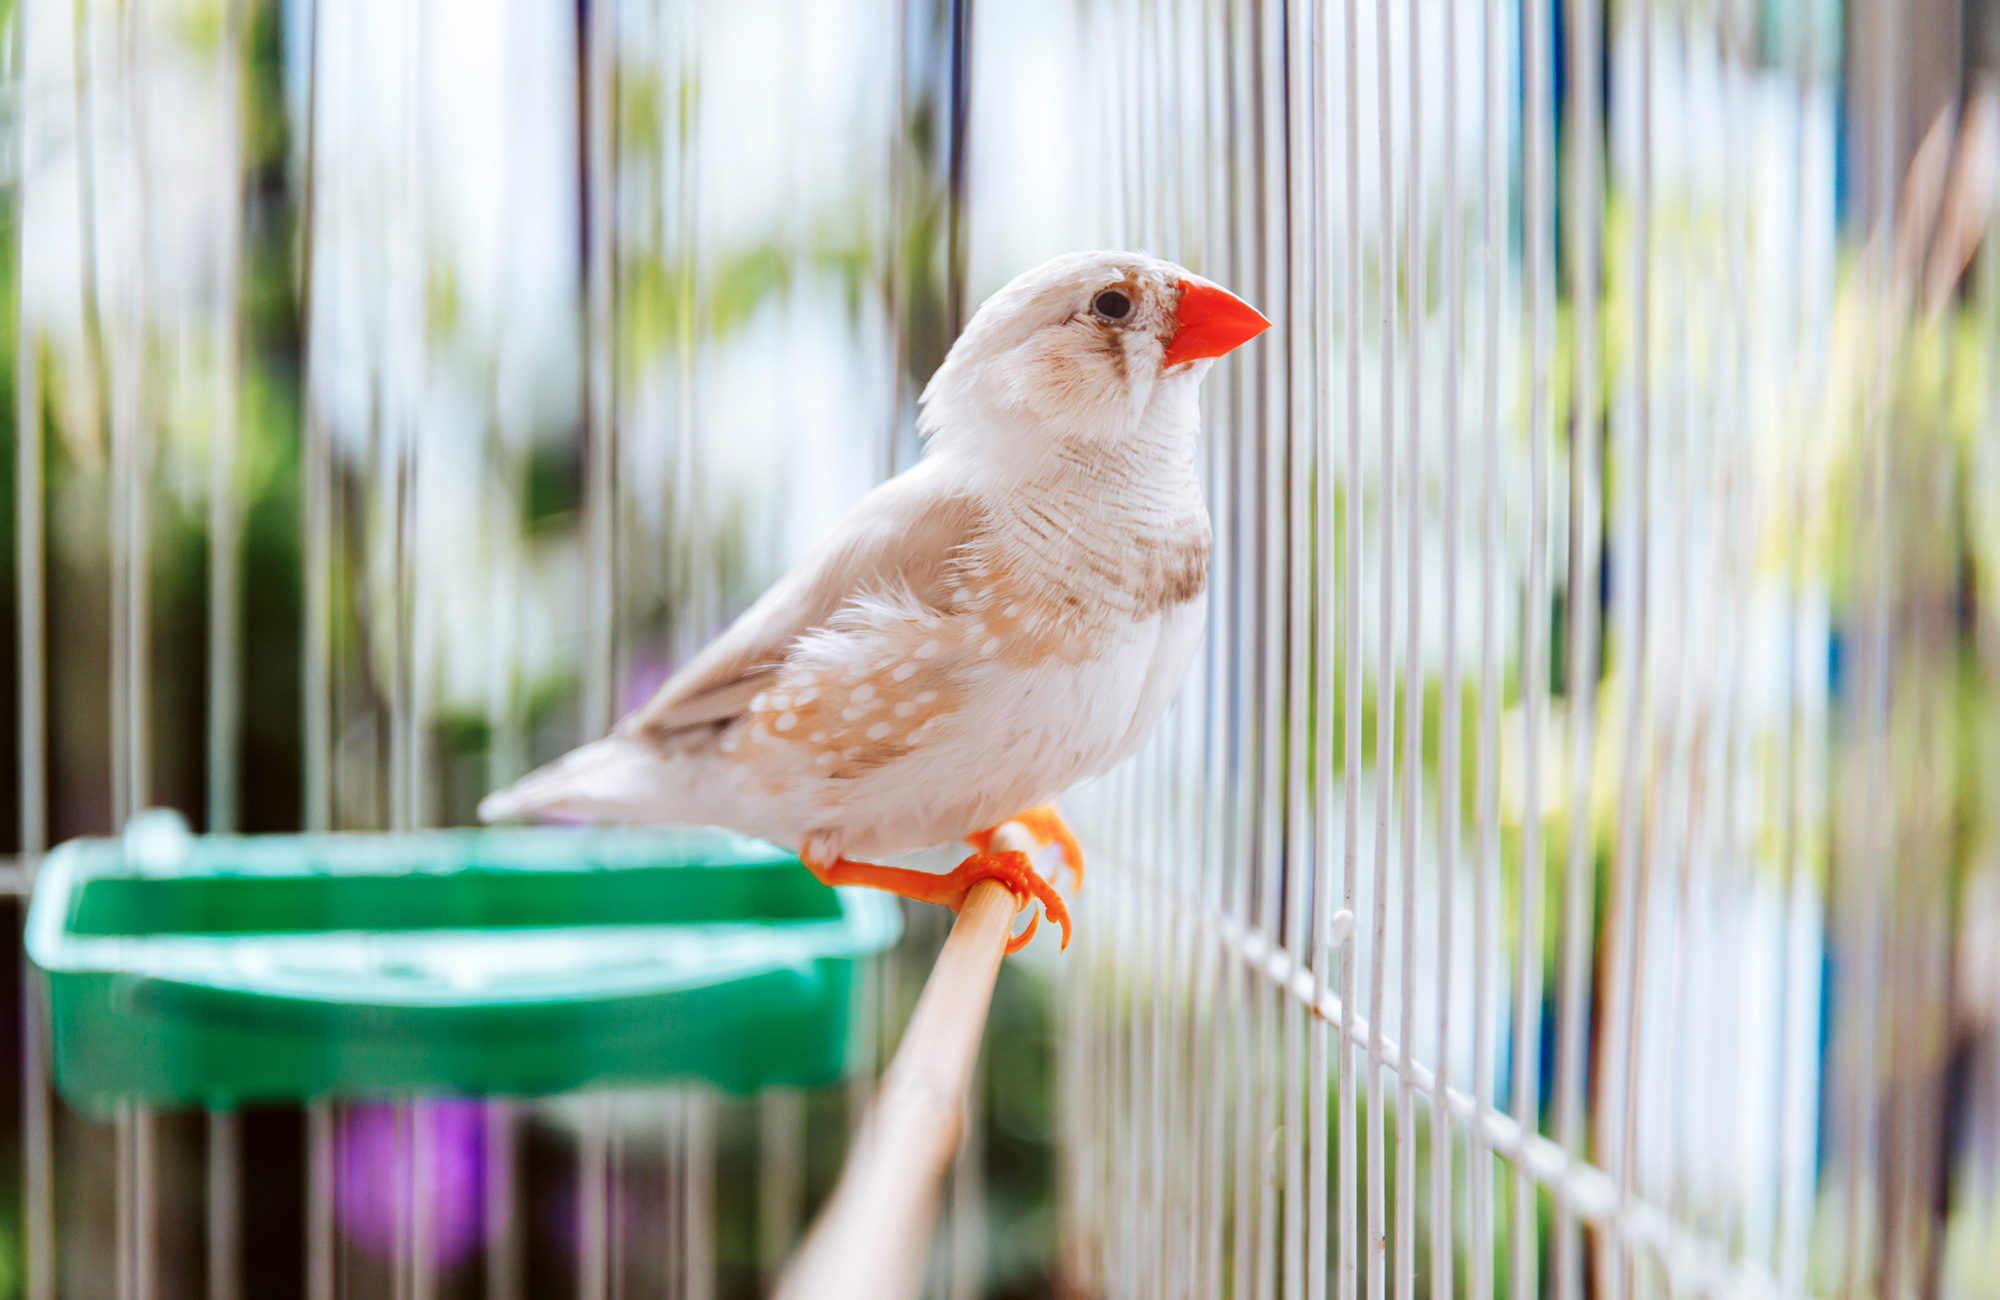 Why does the caged bird sing?